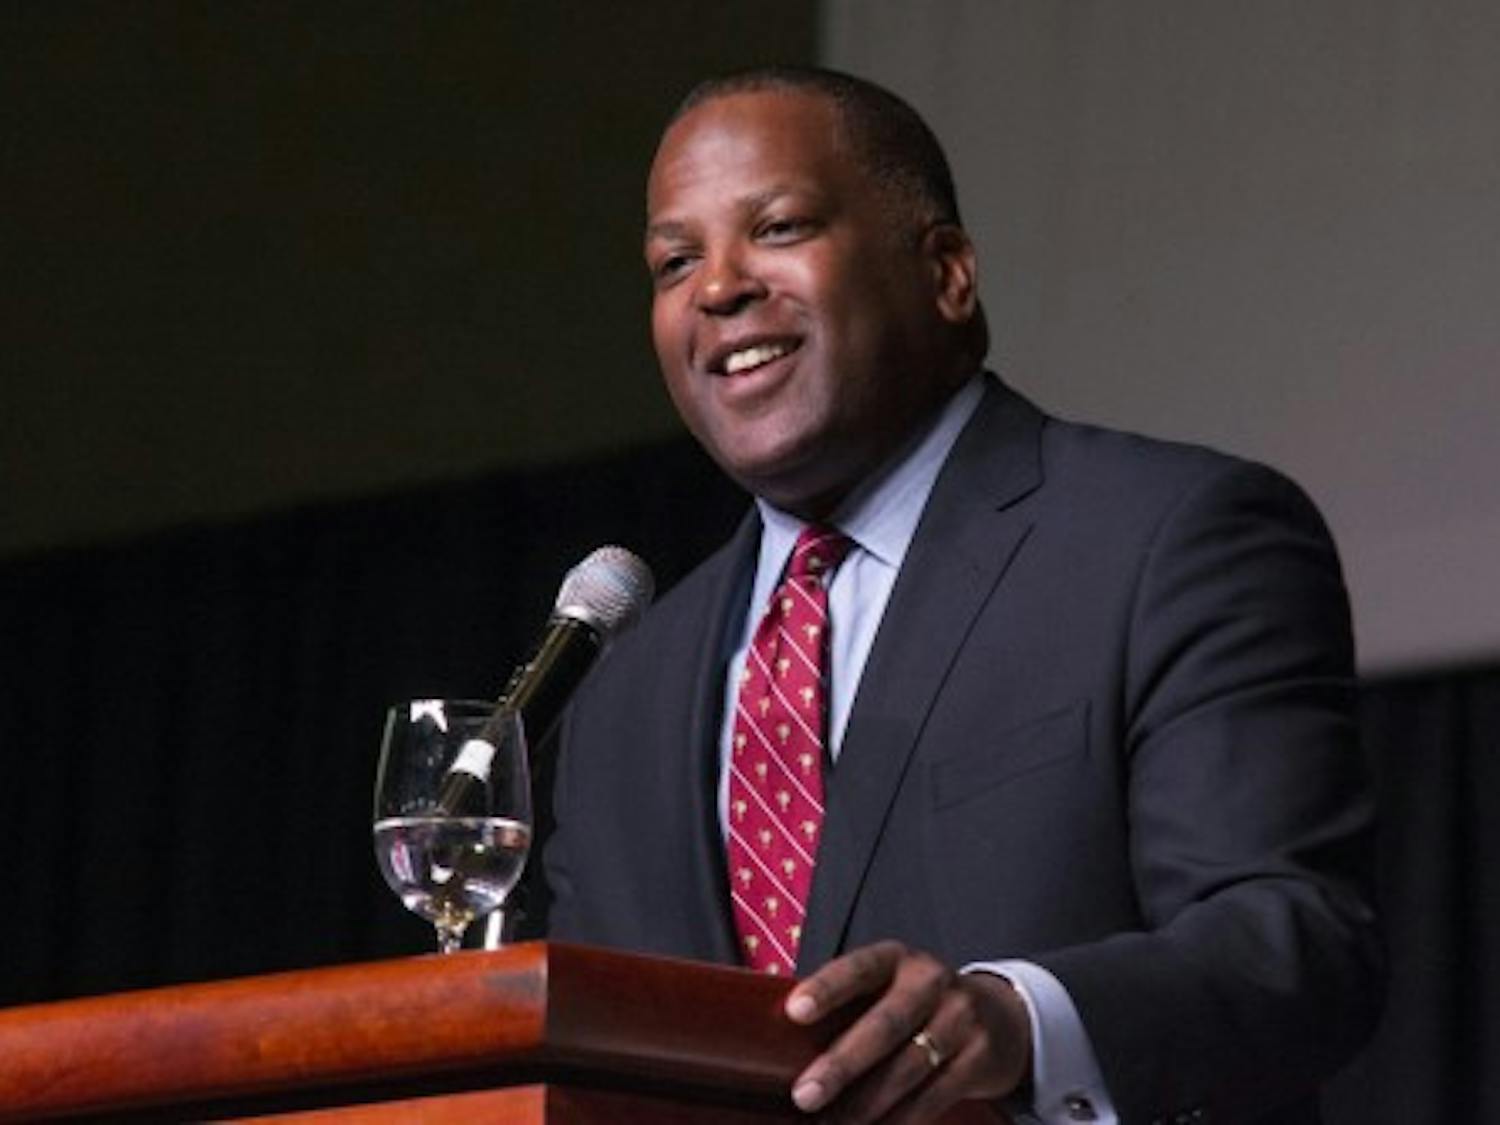 Mayor Steve Benjamin sets the agenda for his next term in office at the Columbia Metropolitan Convention Center on Tuesday, focusing on city improvements.